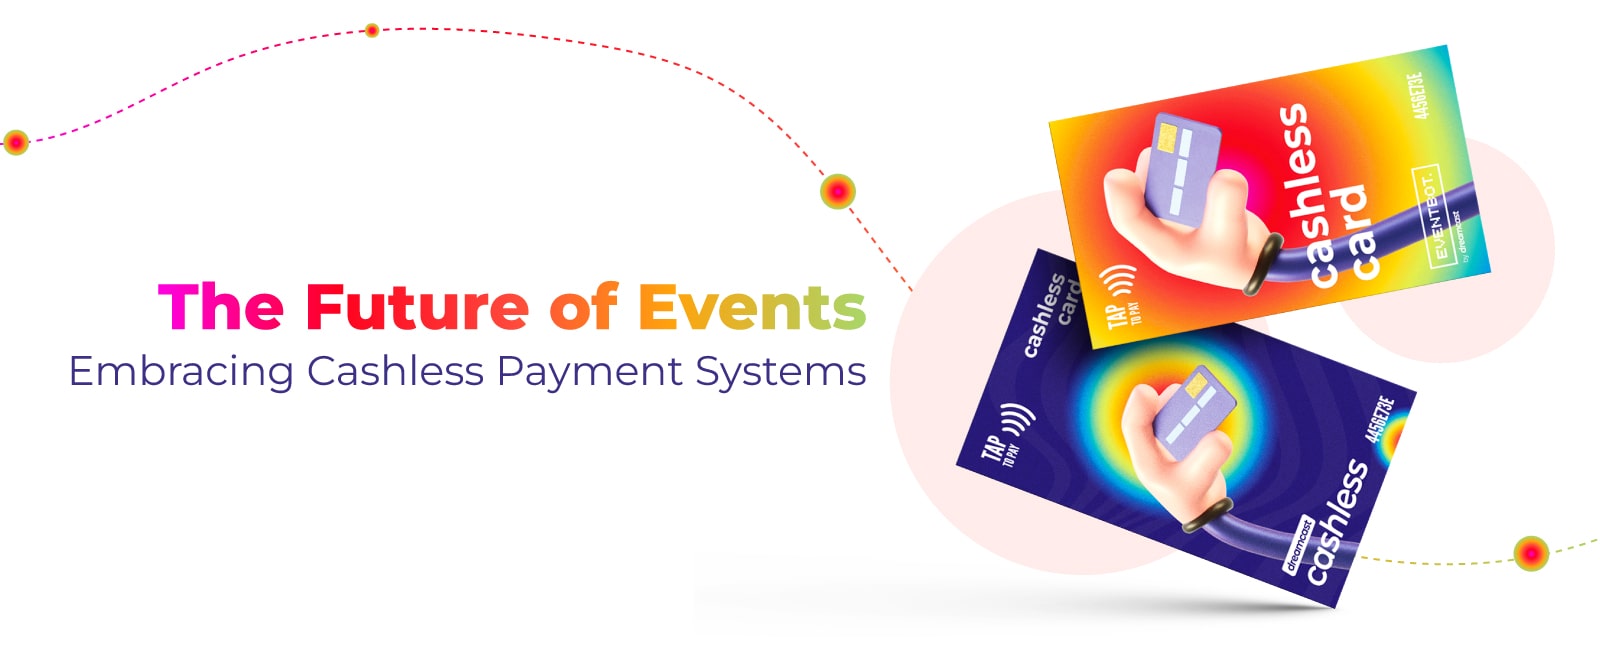 The Future of Events: Embracing Cashless Payment Systems